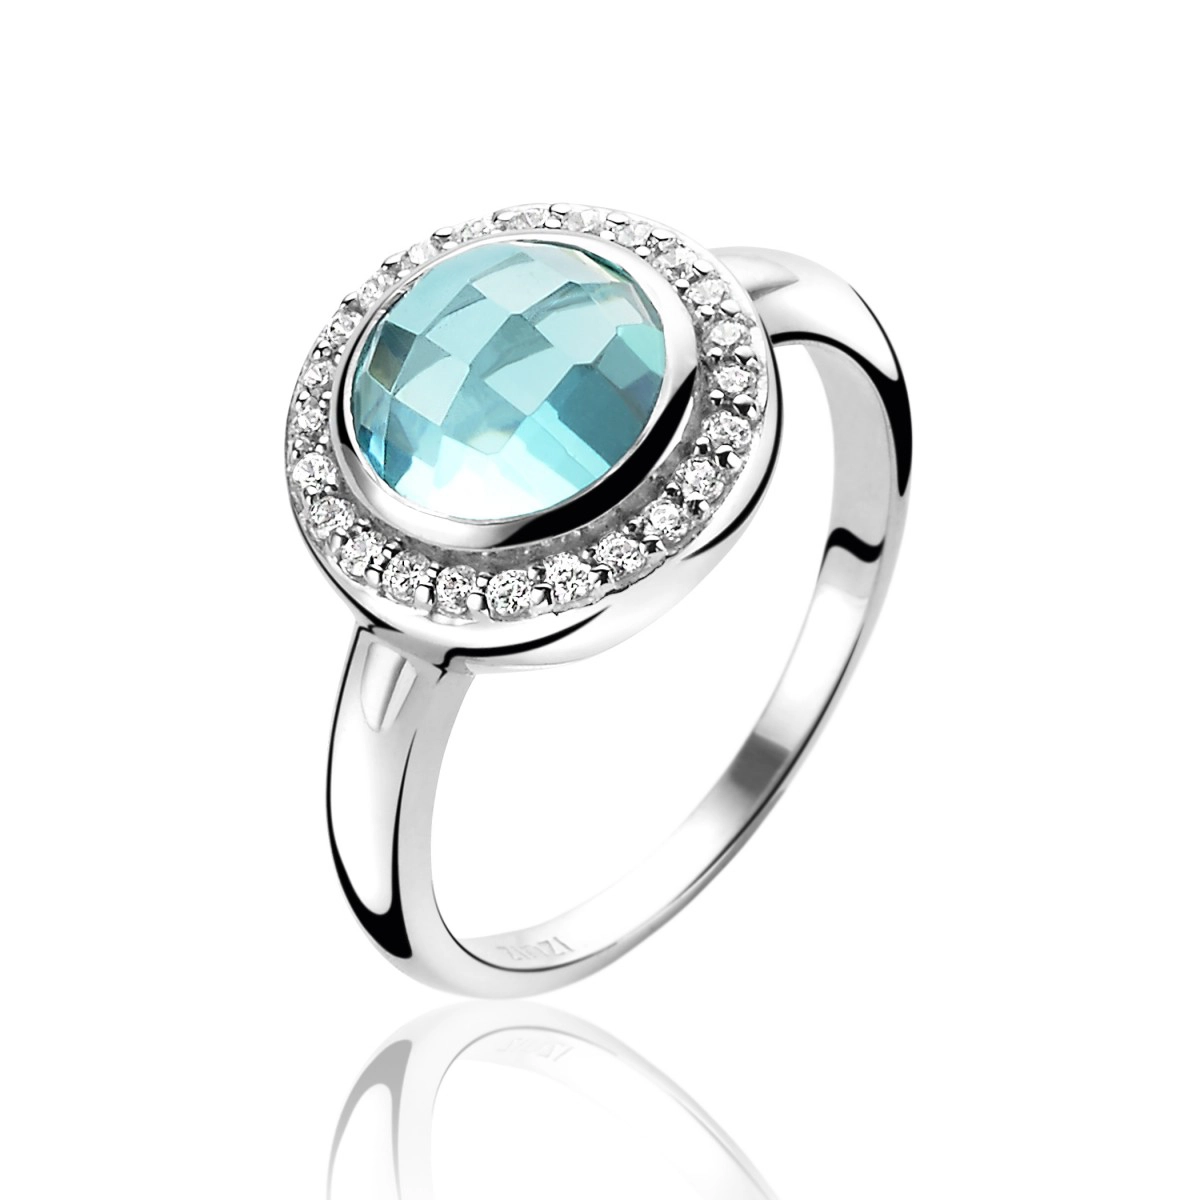 RING SILVER ZINZI RHODIUM-PLATED WITH LARGE CUBIC ZIRCONIA CENTRAL AQUAMARINE SURROUNDED BY ZIRCONS WHITE ZIR1085